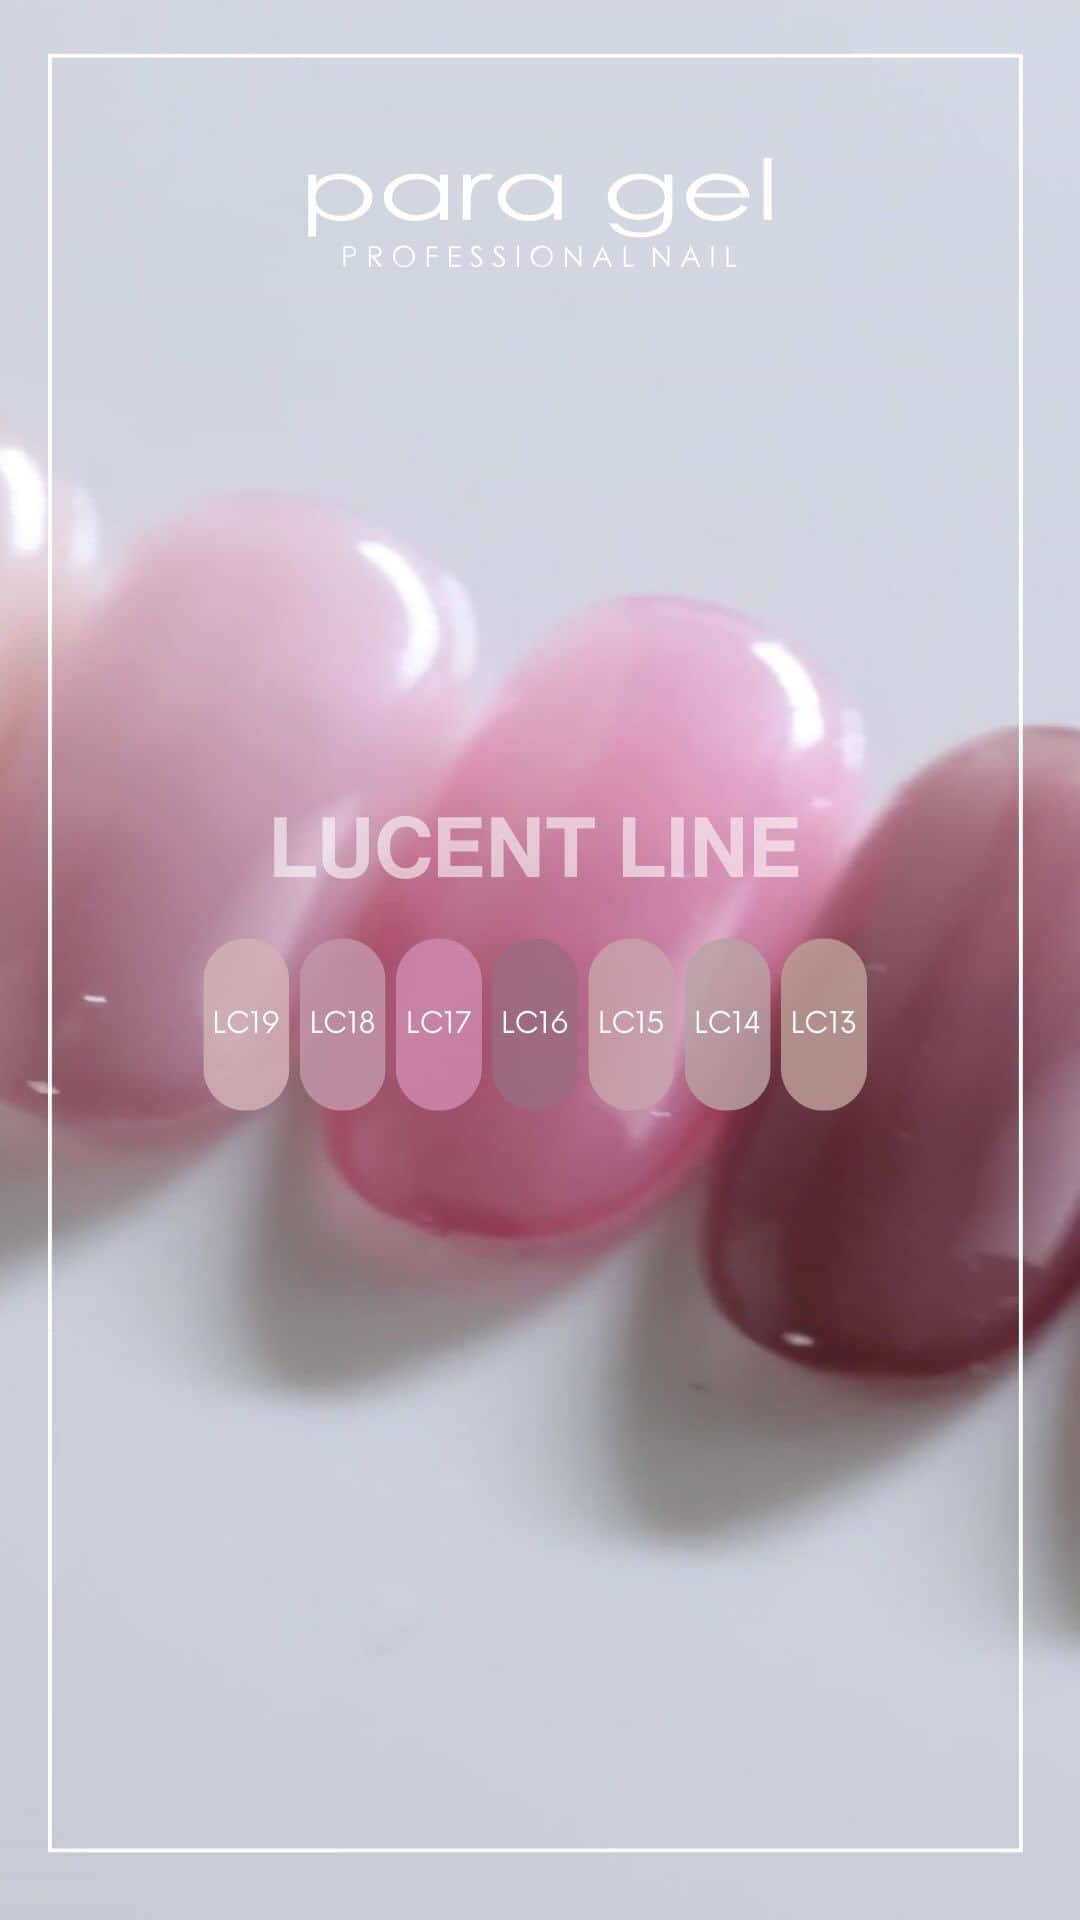 paragel のインスタグラム：「［ Para Gel ｜Lucent Line Colors］  Delicate translucent colors.  Soft gel texture that produces a smooth, even finish.  上品に、華やかに。 豊かな表情で魅せる、テクスチャーが映えるニューカラー。  #paragel_LC13 #paragel_LC14 #paragel_LC15 #paragel_LC16 #paragel_LC17 #paragel_LC18 #paragel_LC19  #paragel_lucentline ———————————— @paragel.usa Para Gel is a no buffing, no damage, professional gel nail system from Japan.  完全サンディング不要のジェルネイル パラジェルの公式インスタグラムです。 paragel color ▷ @paragelcolor  #paragel #paragelcolorranking #paragelnail #paragelnyc #nailpro #bestsellers #gelnails #japanesegelnails #nailtrends #パラジェル #japanesegels #nobuffinggels #nailpromoter #nailartdesigner #nailslover #nailartfans #nailnewcolor #newcolorsnails #nailartfanatics #nailartistguide #nailsdesigns #nailartideas2023」